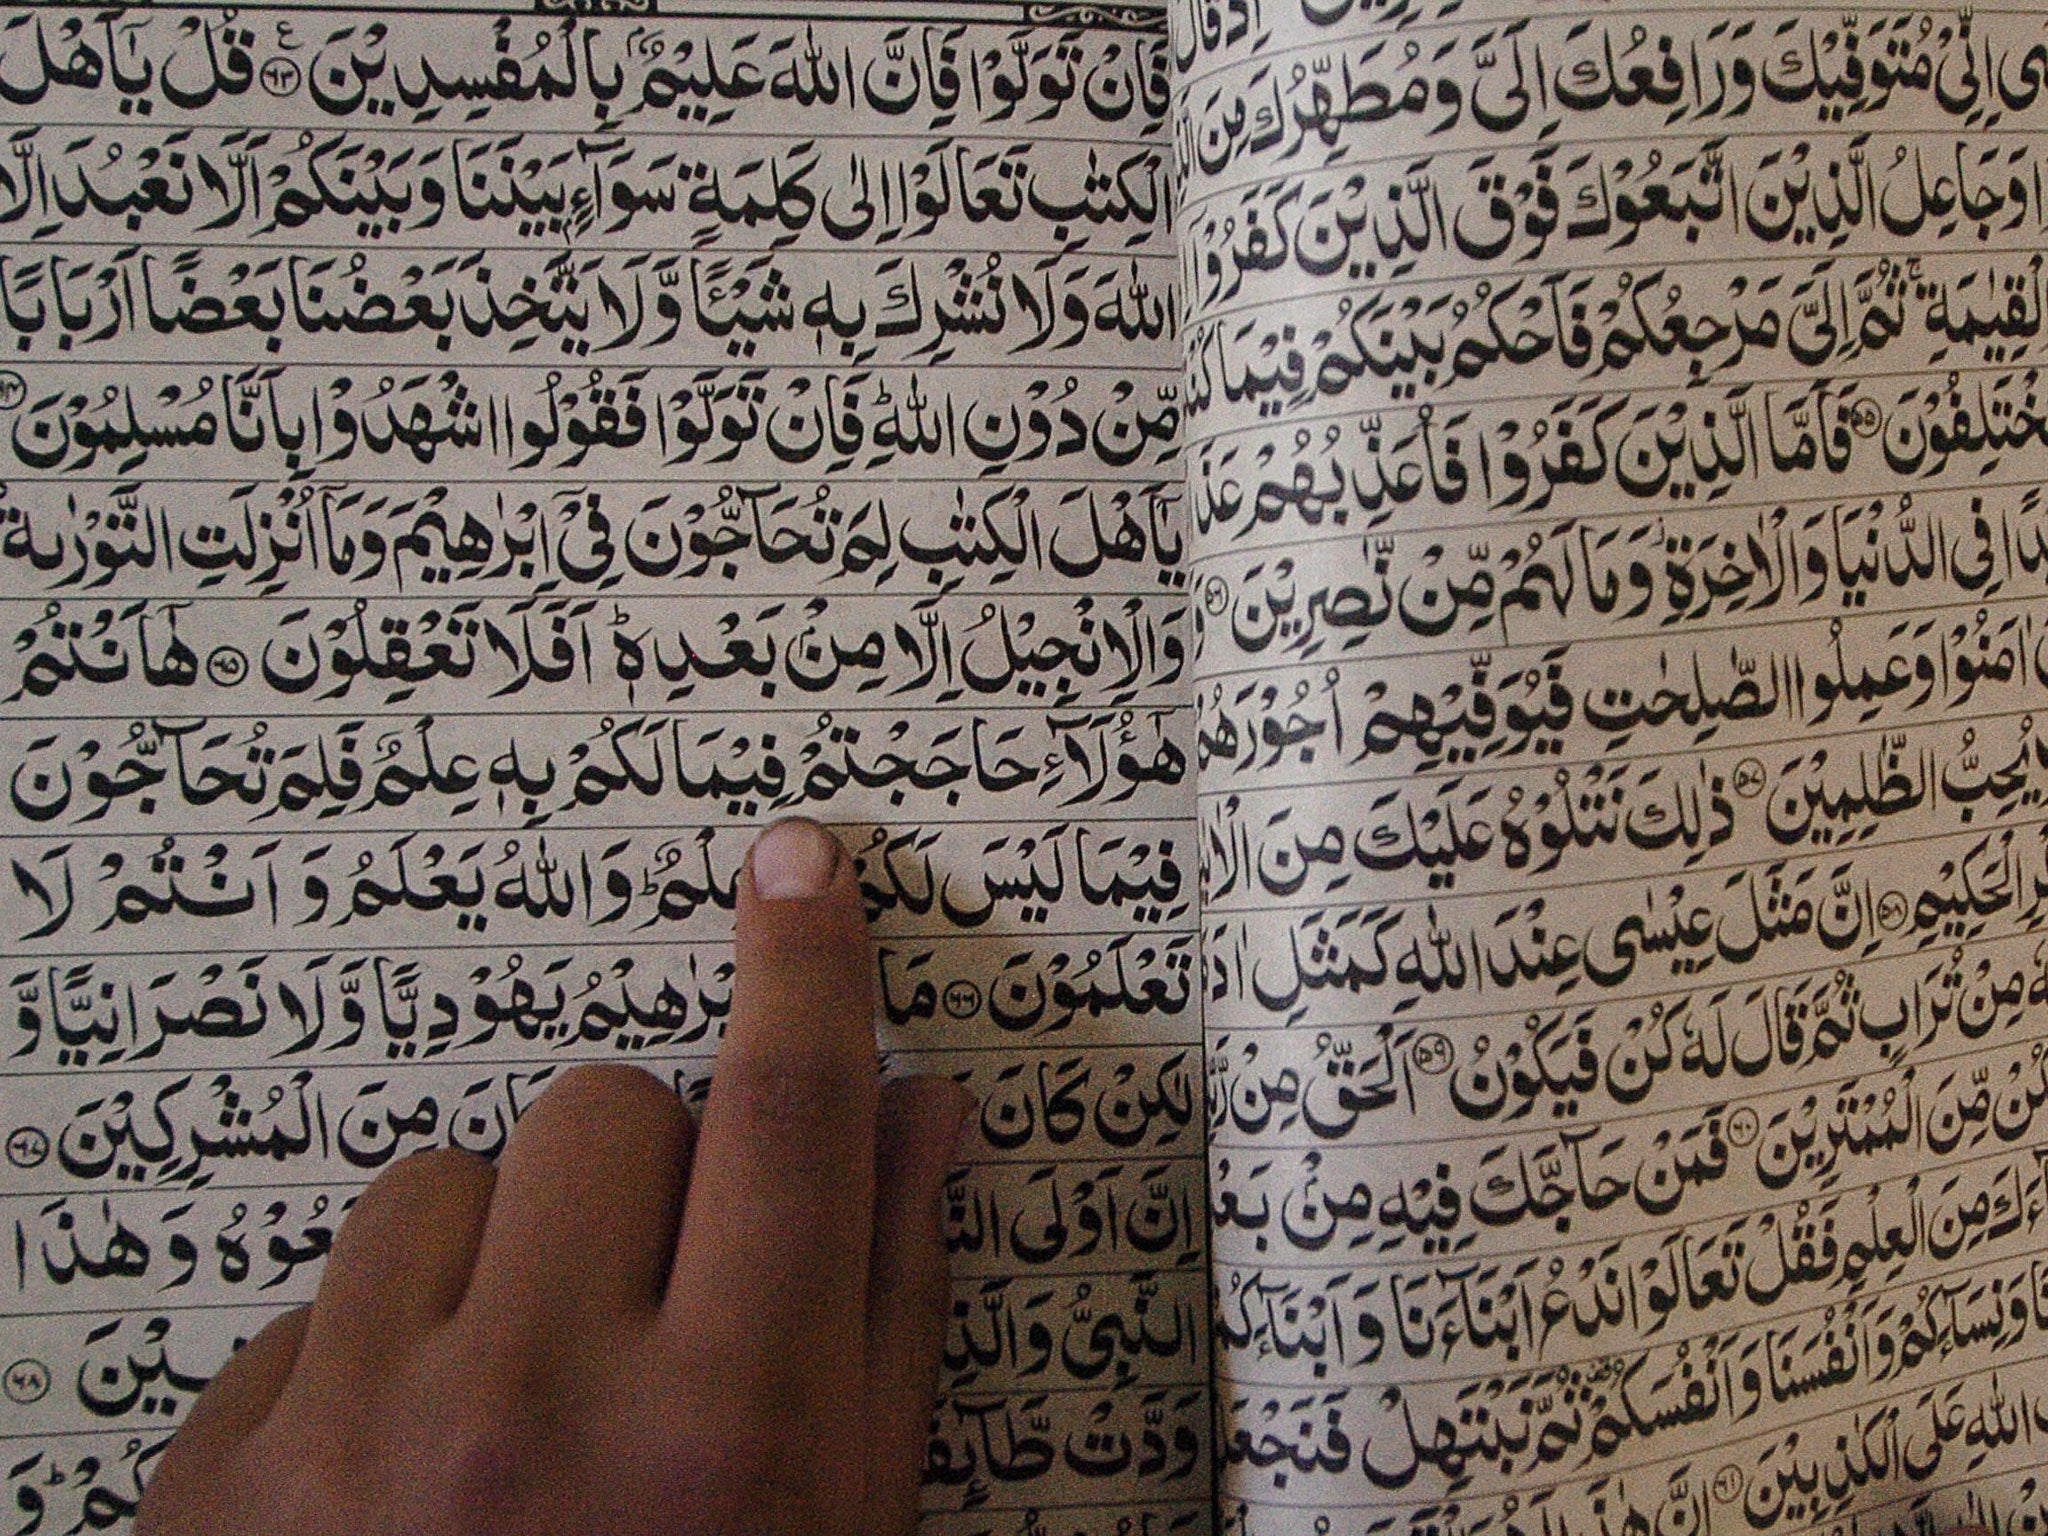 A man is to be executed after ripping up a Koran